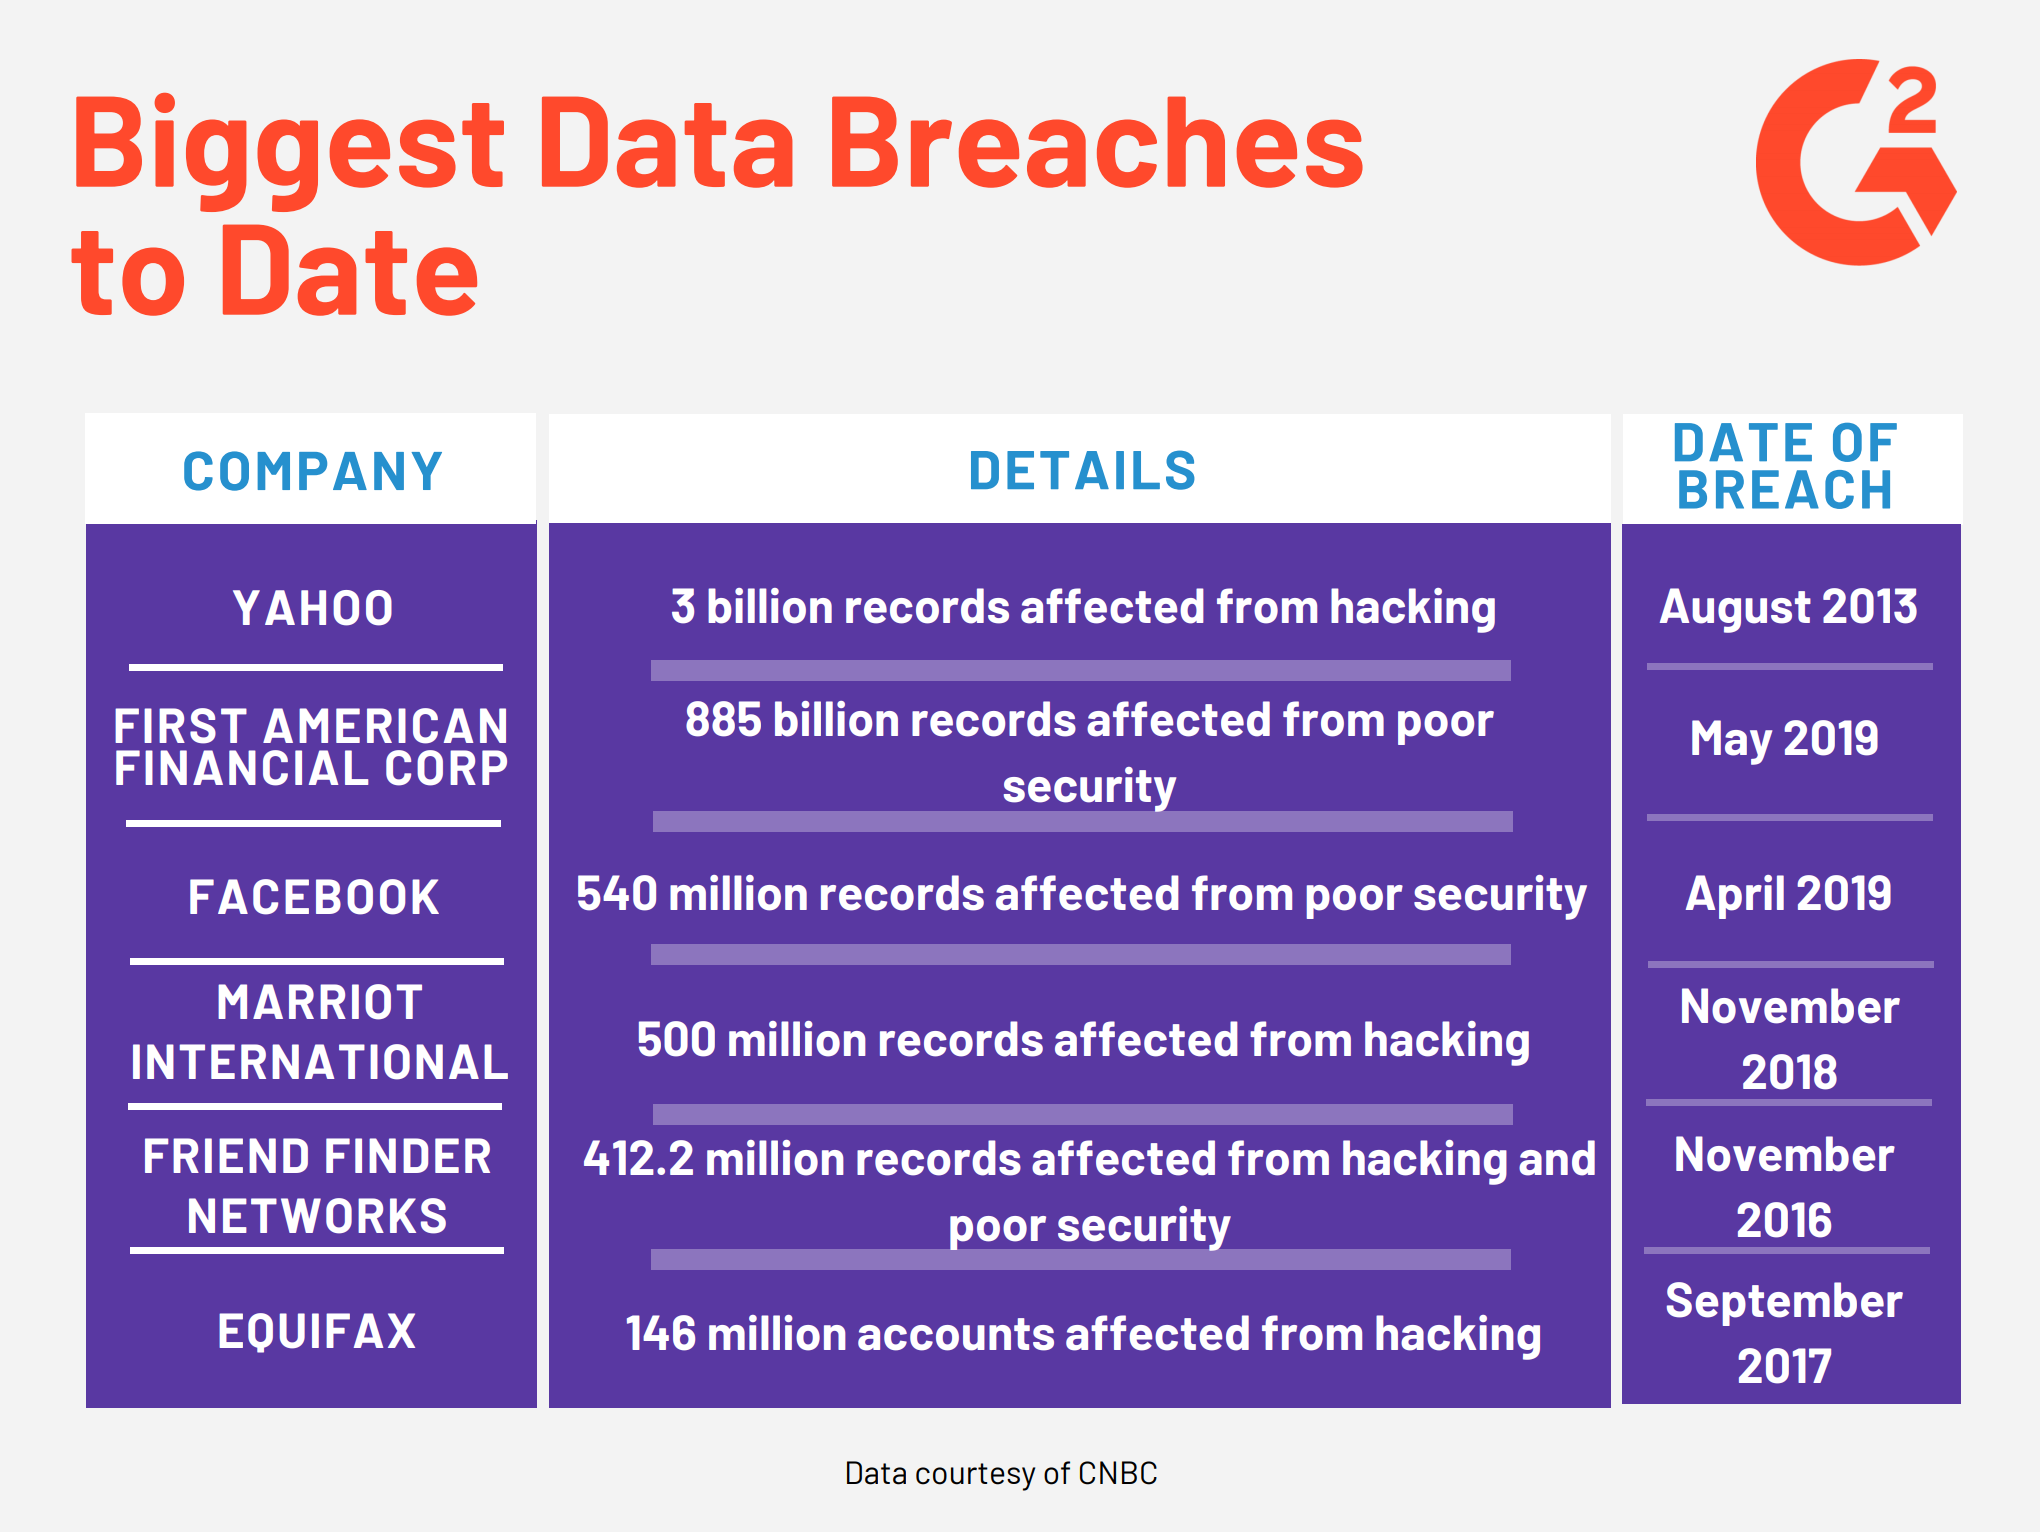 data breach meaning in english